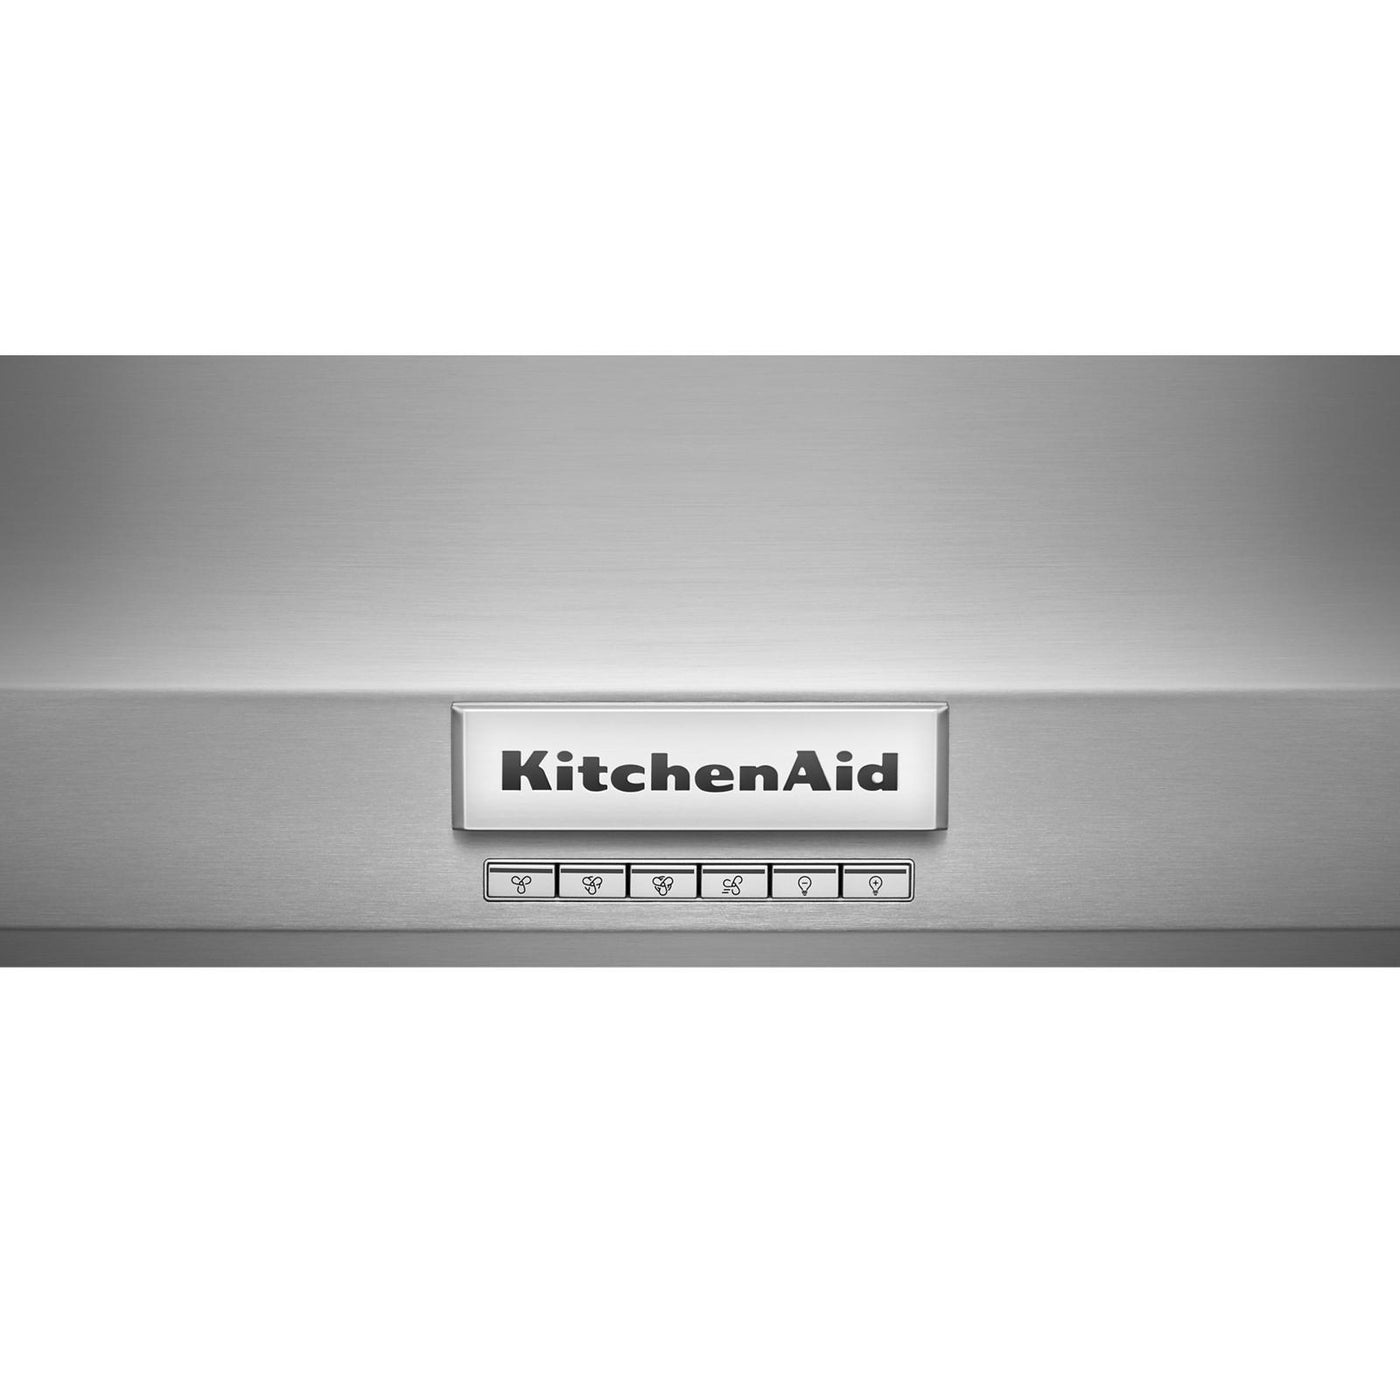 KitchenAid Stainless Steel 36" Commercial-Style Wall-Mount Canopy Range Hood - KVWC956KSS